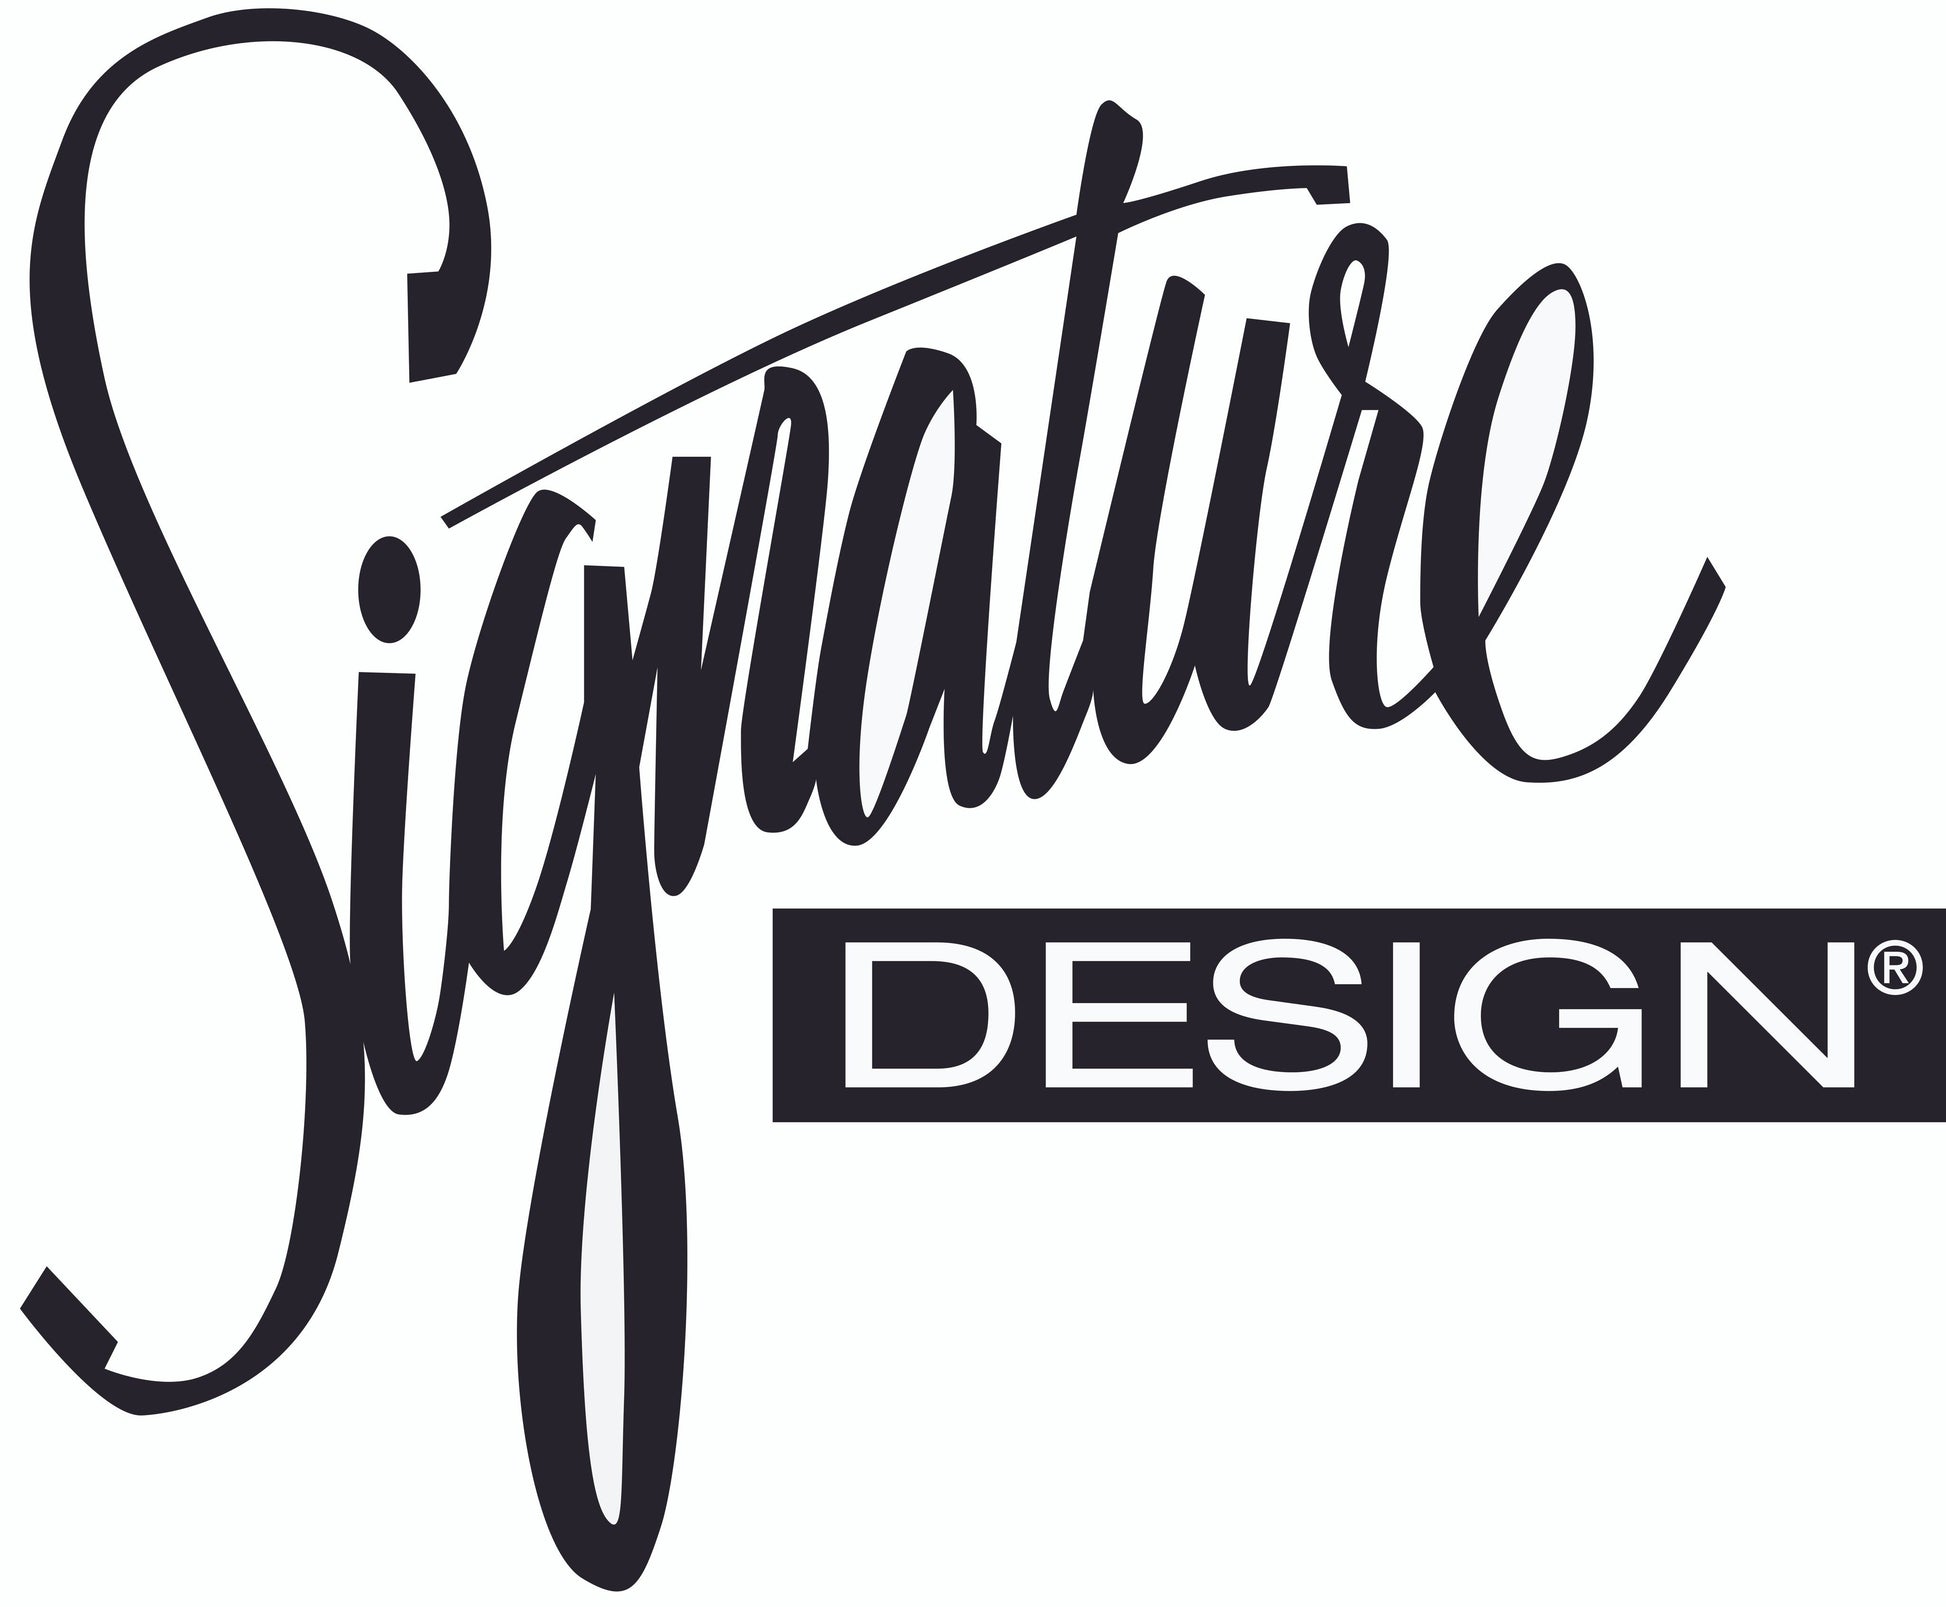 Fortmaine Rectangular Cocktail Table Signature Design by Ashley®